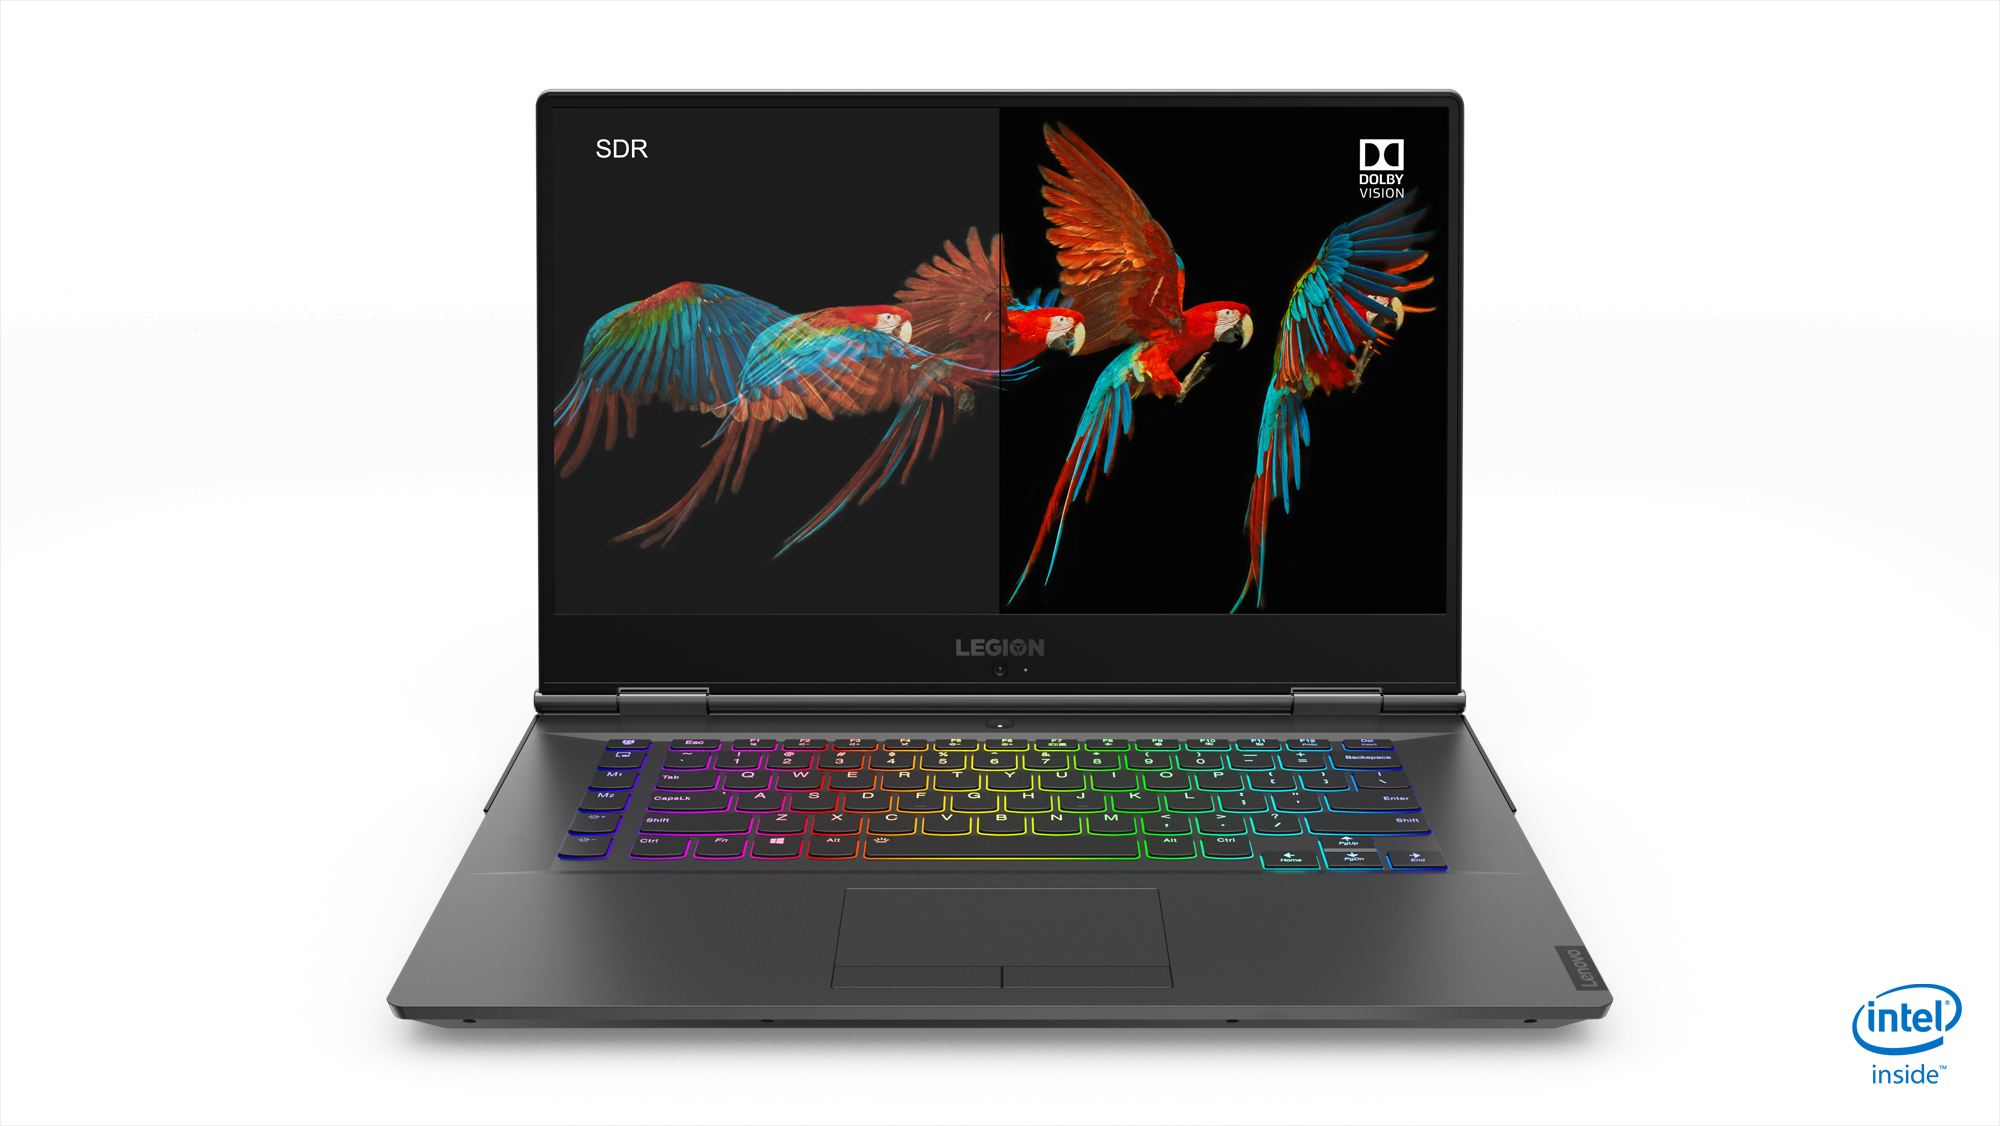 lenovo new legion gaming laptops ces 2019 13 y740 notebook 15inch hero dolby vision